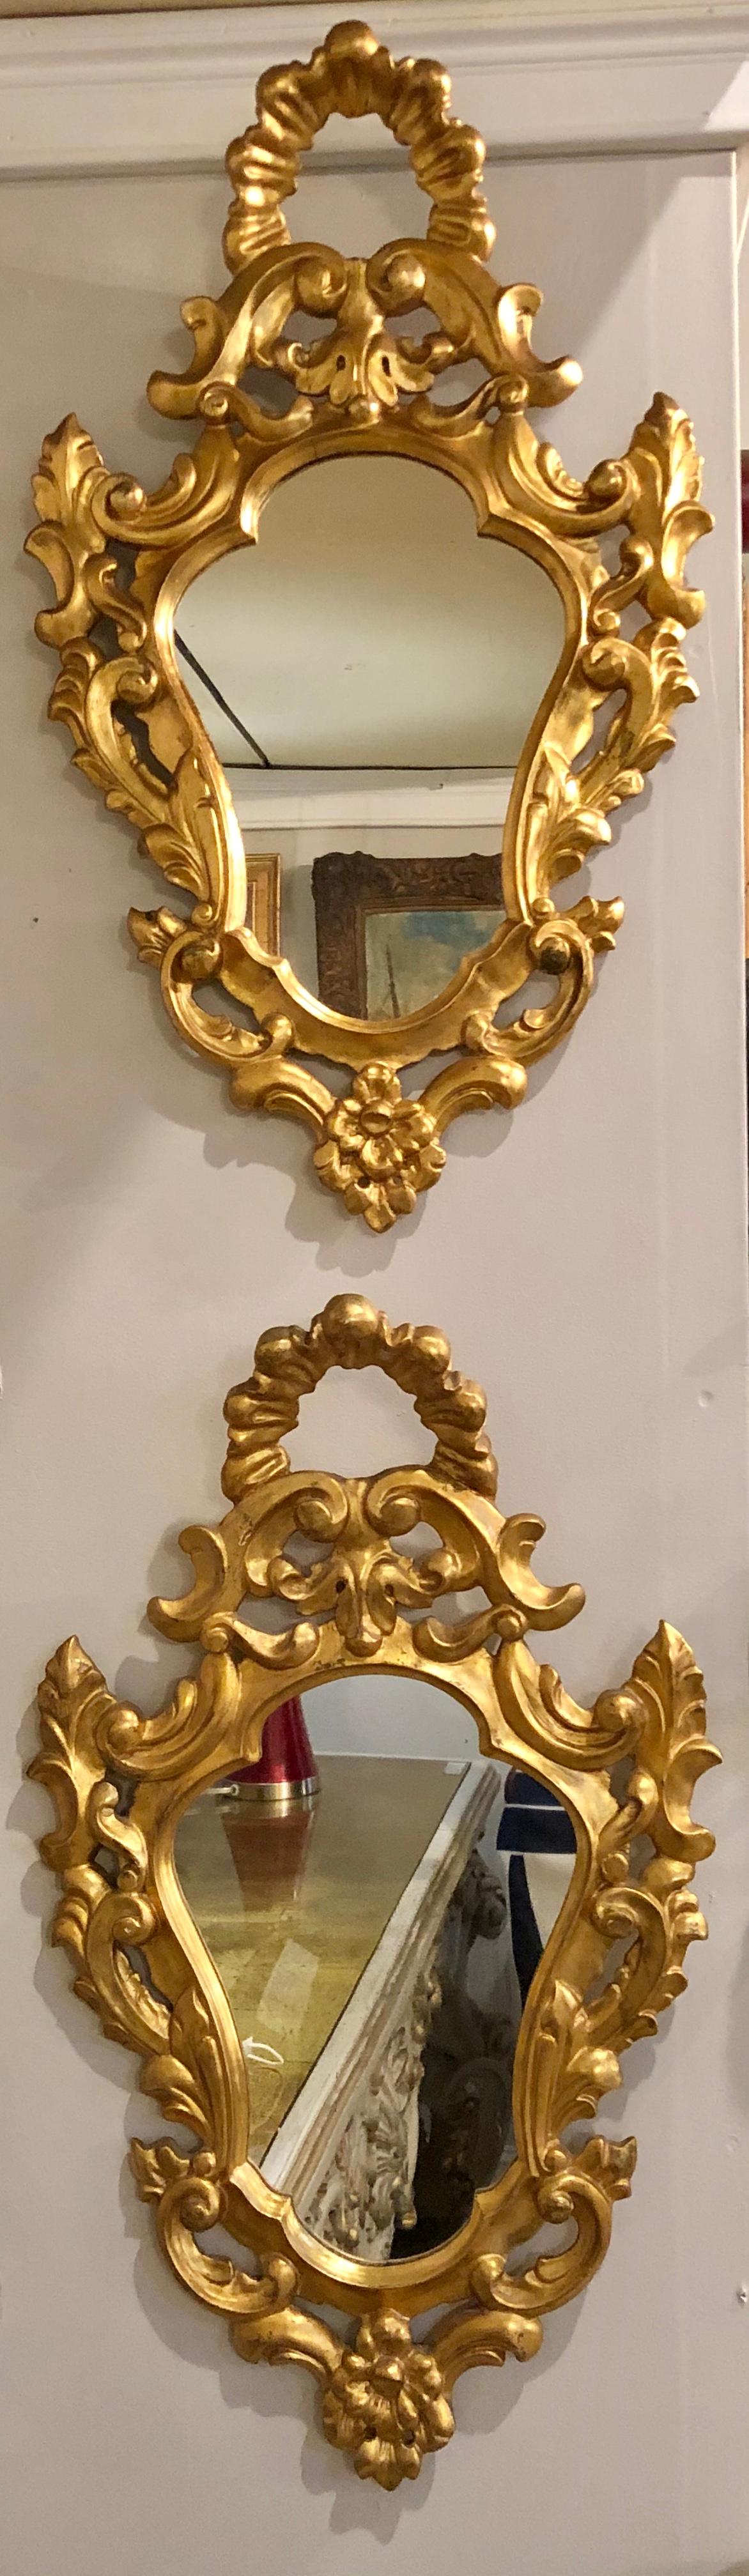 Pair of Italian Rococo Wall Mirrors, Giltwood Carved 2